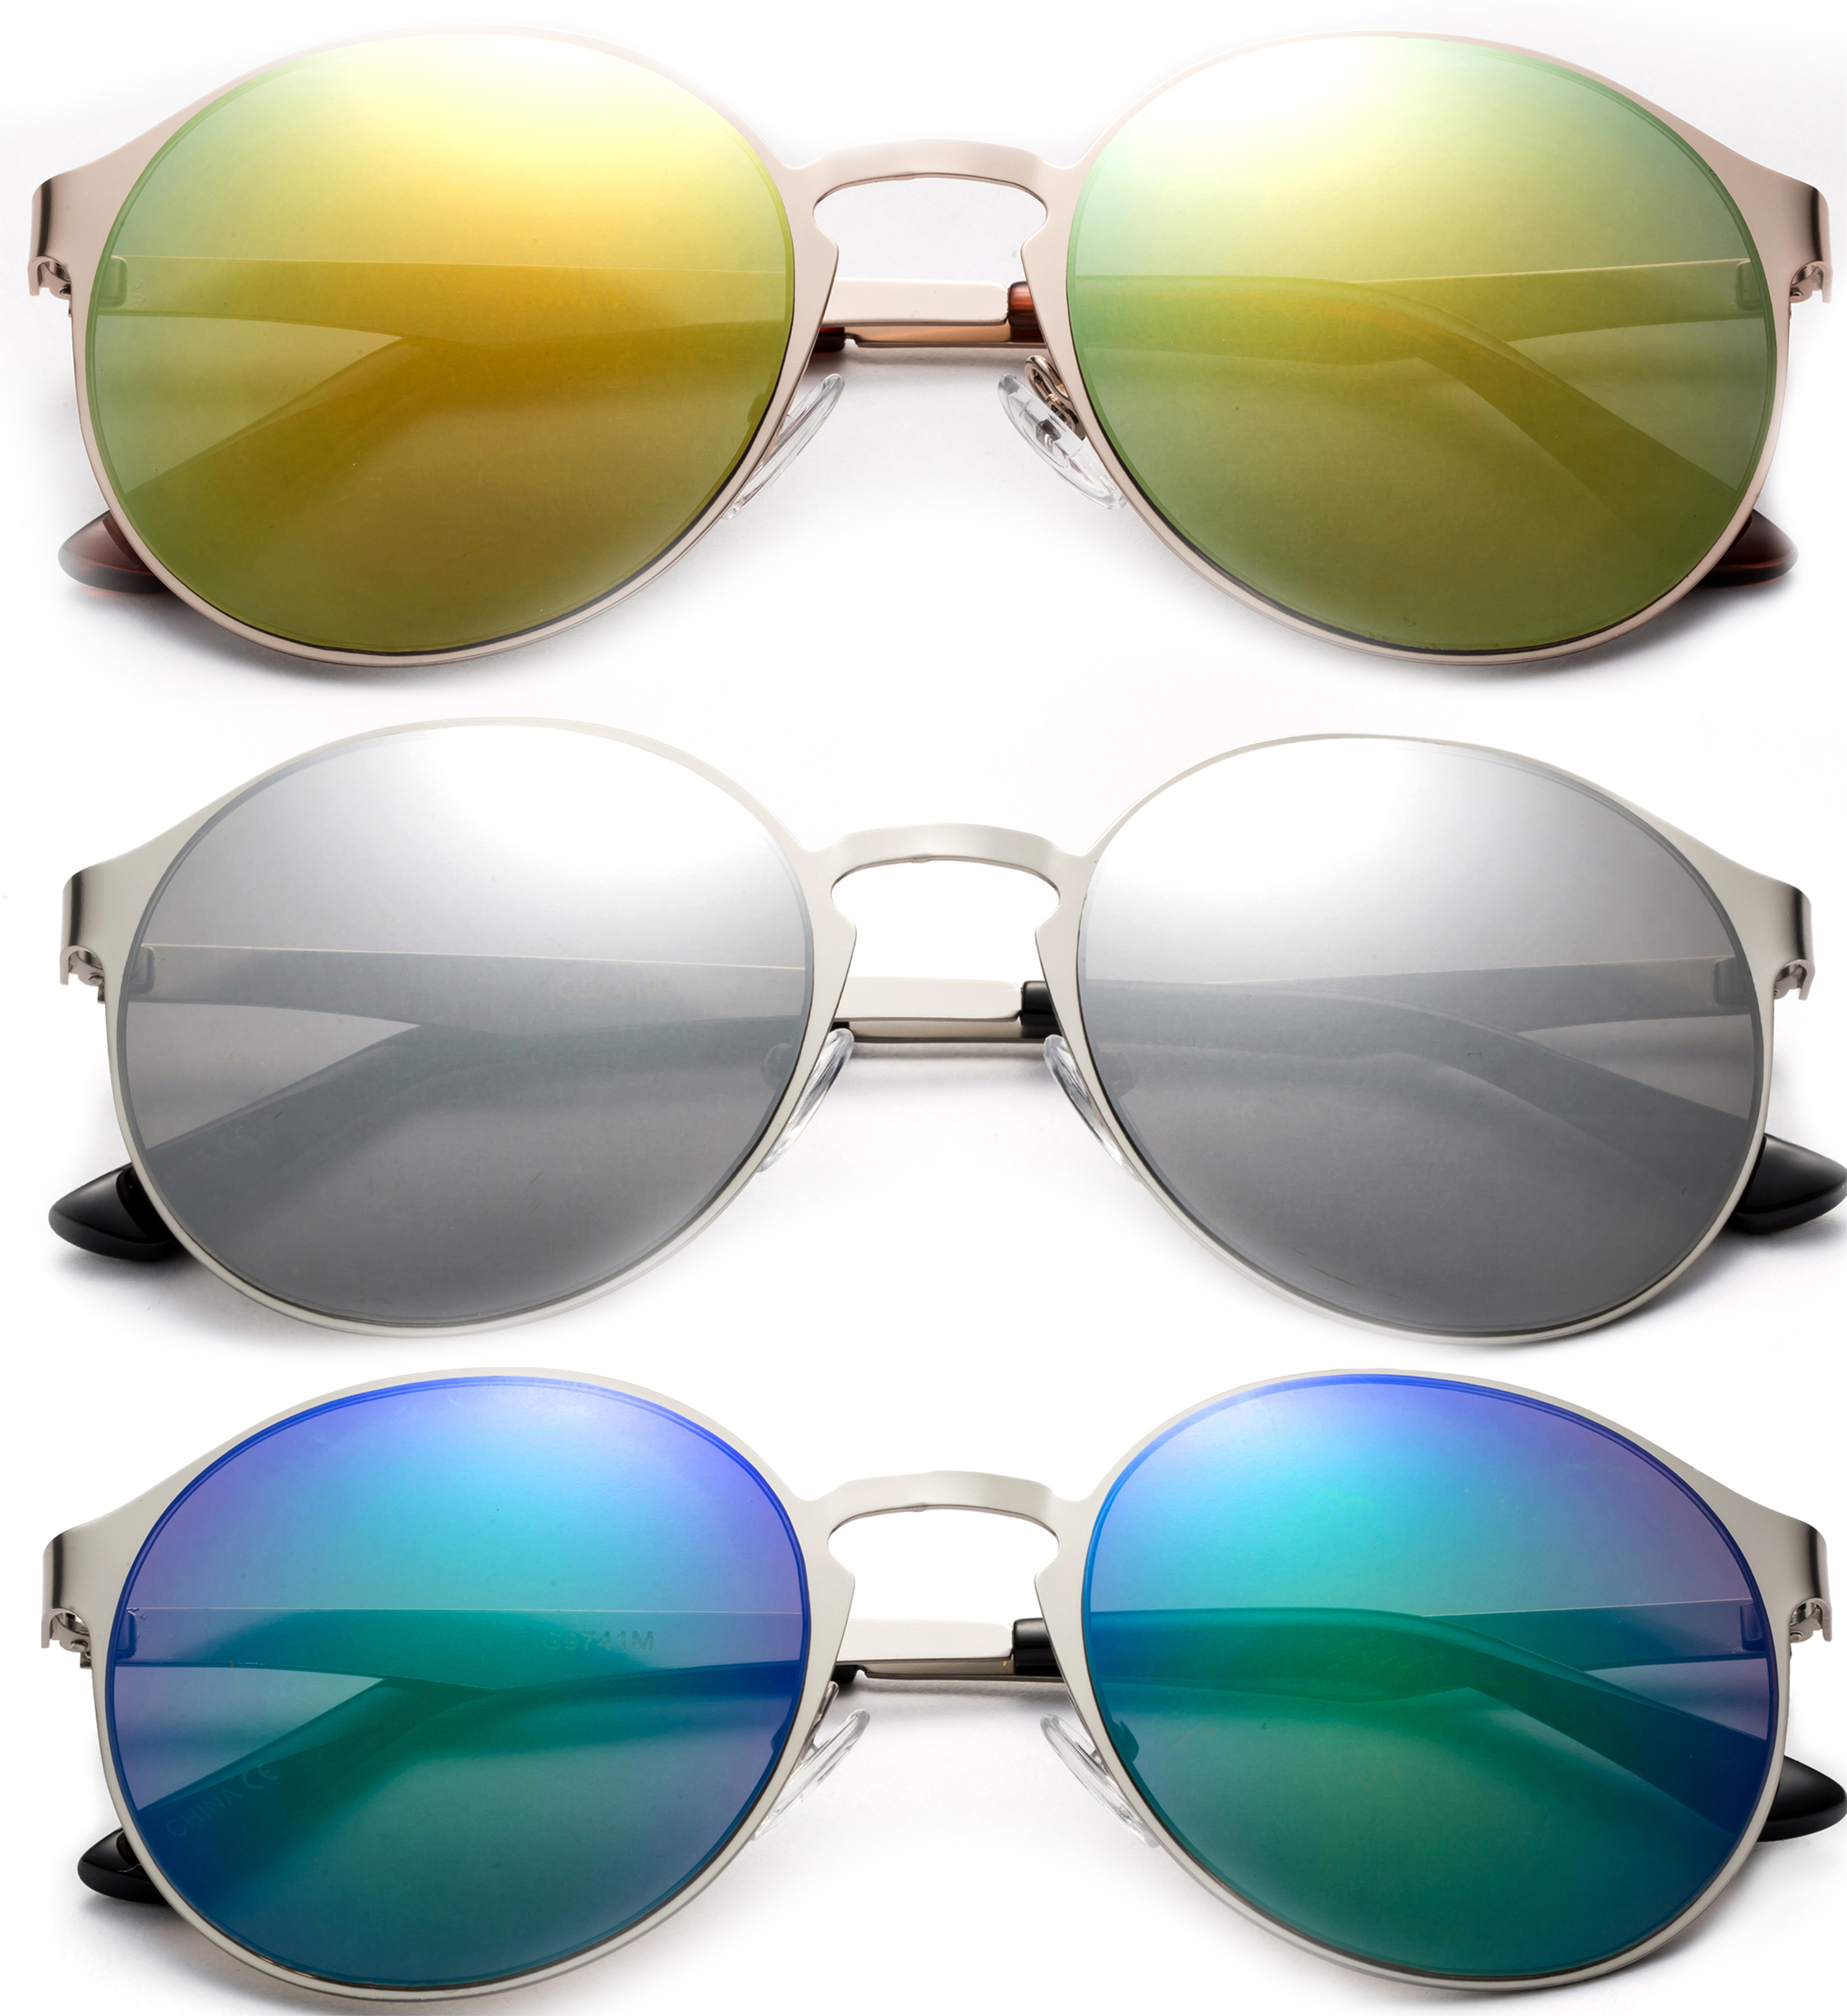 3 Pack Metal One Piece Round Frame Fashion Sunglasses for Men for Women, Flash Mirror - image 1 of 2